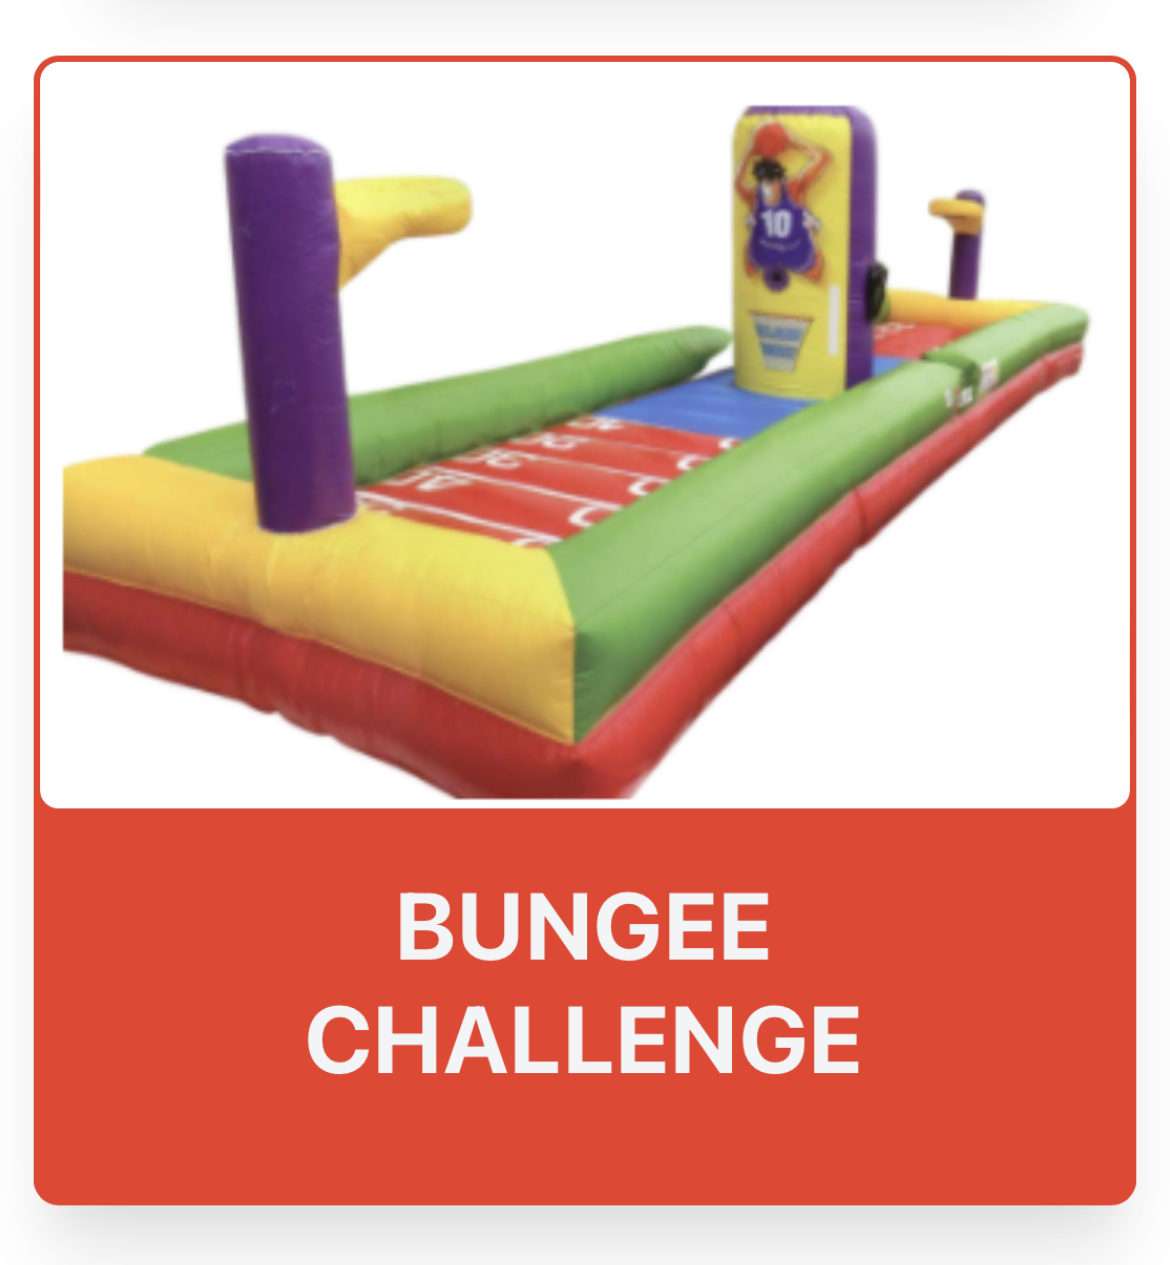 Bungee Challenge